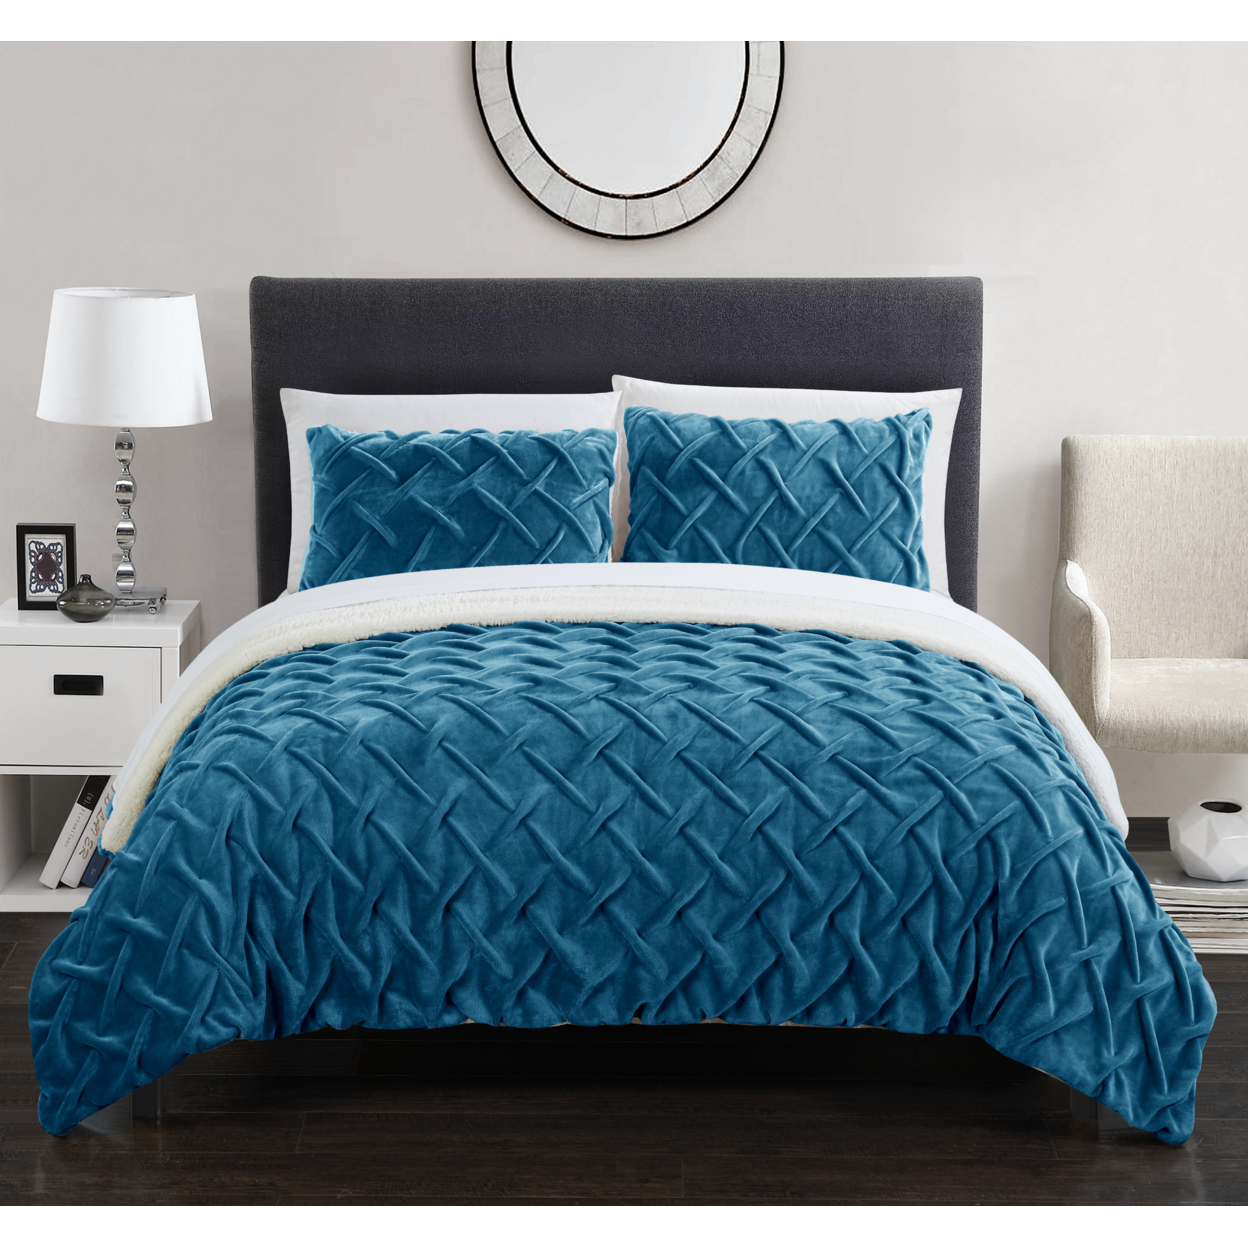 Thirsa 3 Or 2 Piece Comforter Set Ultra Plush Micro Mink Criss Cross Pinch Pleat Sherpa Lined Bedding - Teal, King